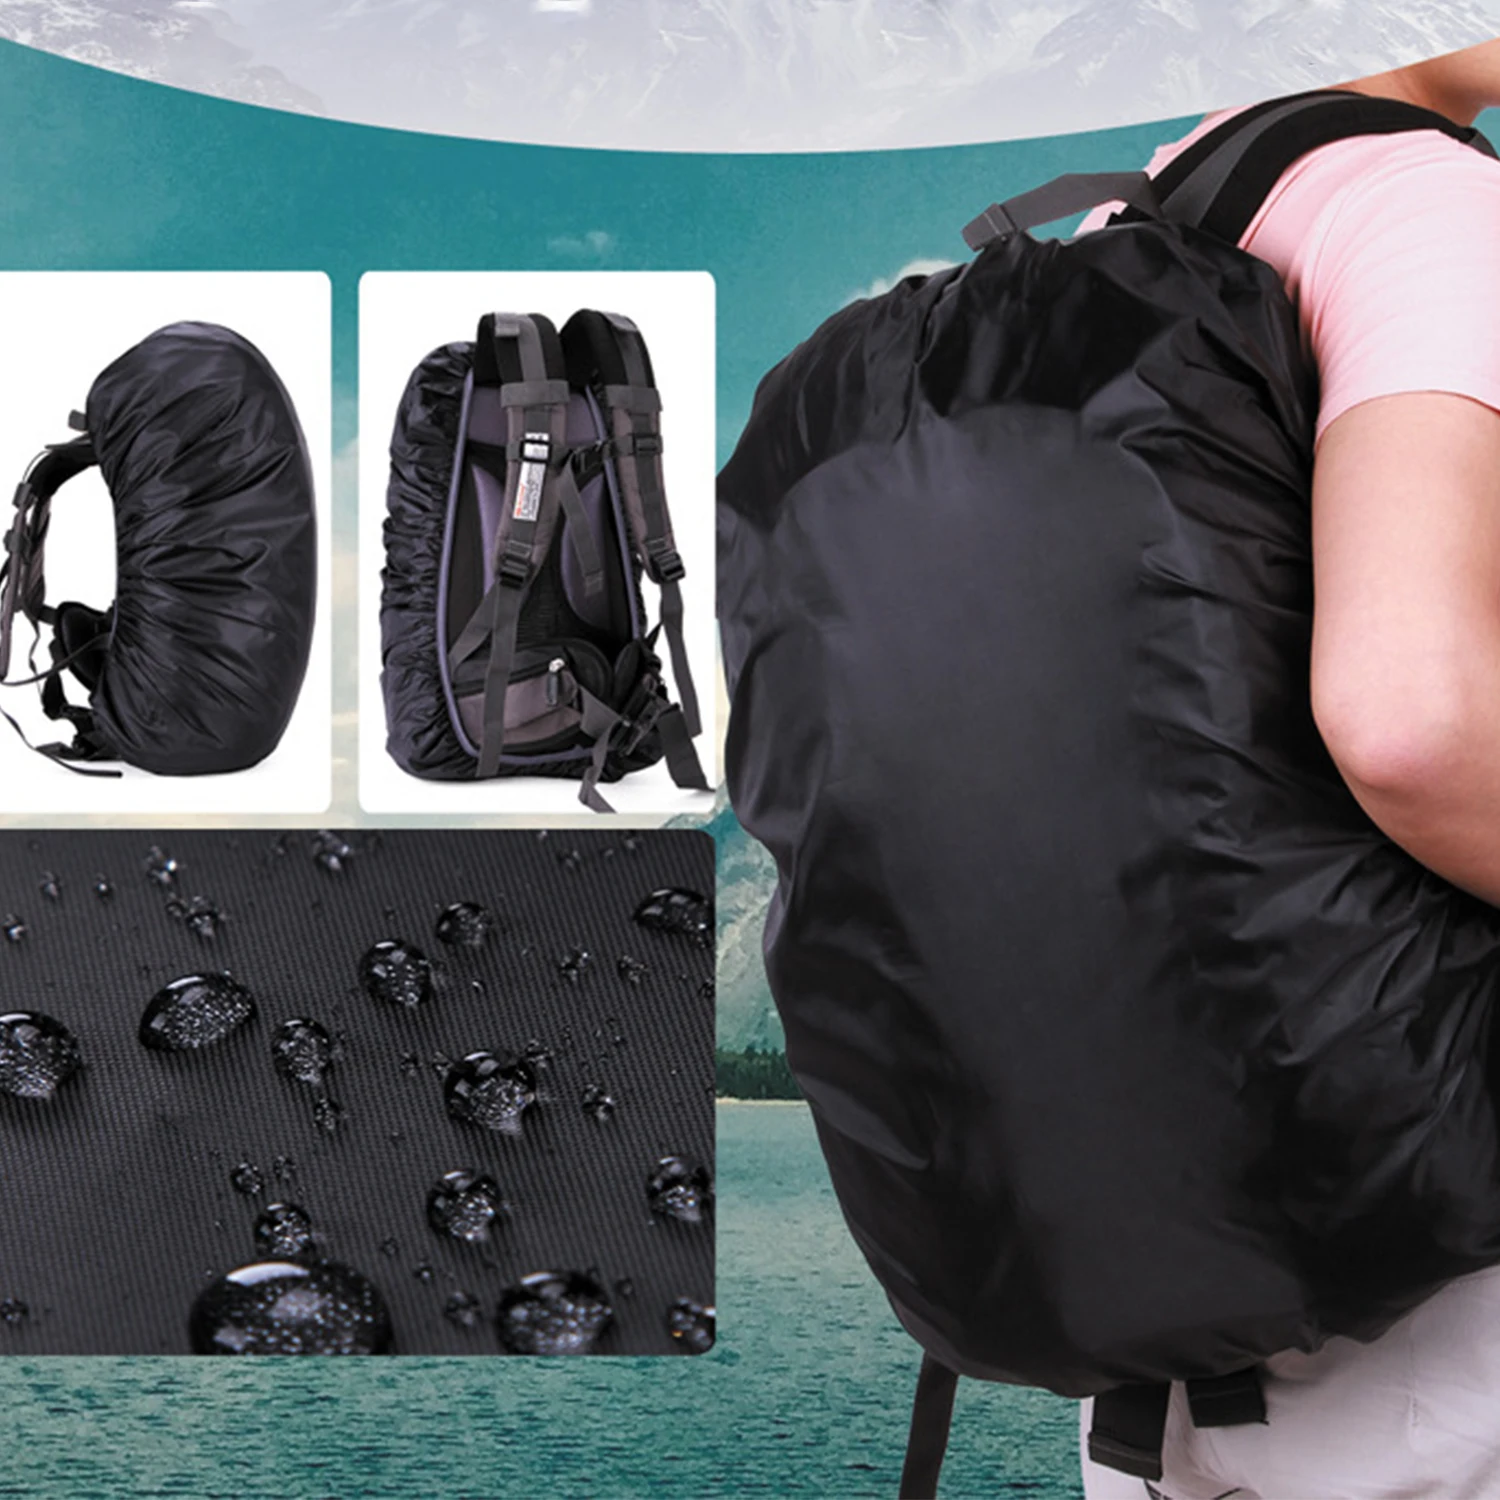 3 Sizes Backpack Rain Cover Collapsible Waterproof Bagcover Tactical Outdoor Camping Hiking Climbing Dust Backpack Raincover New